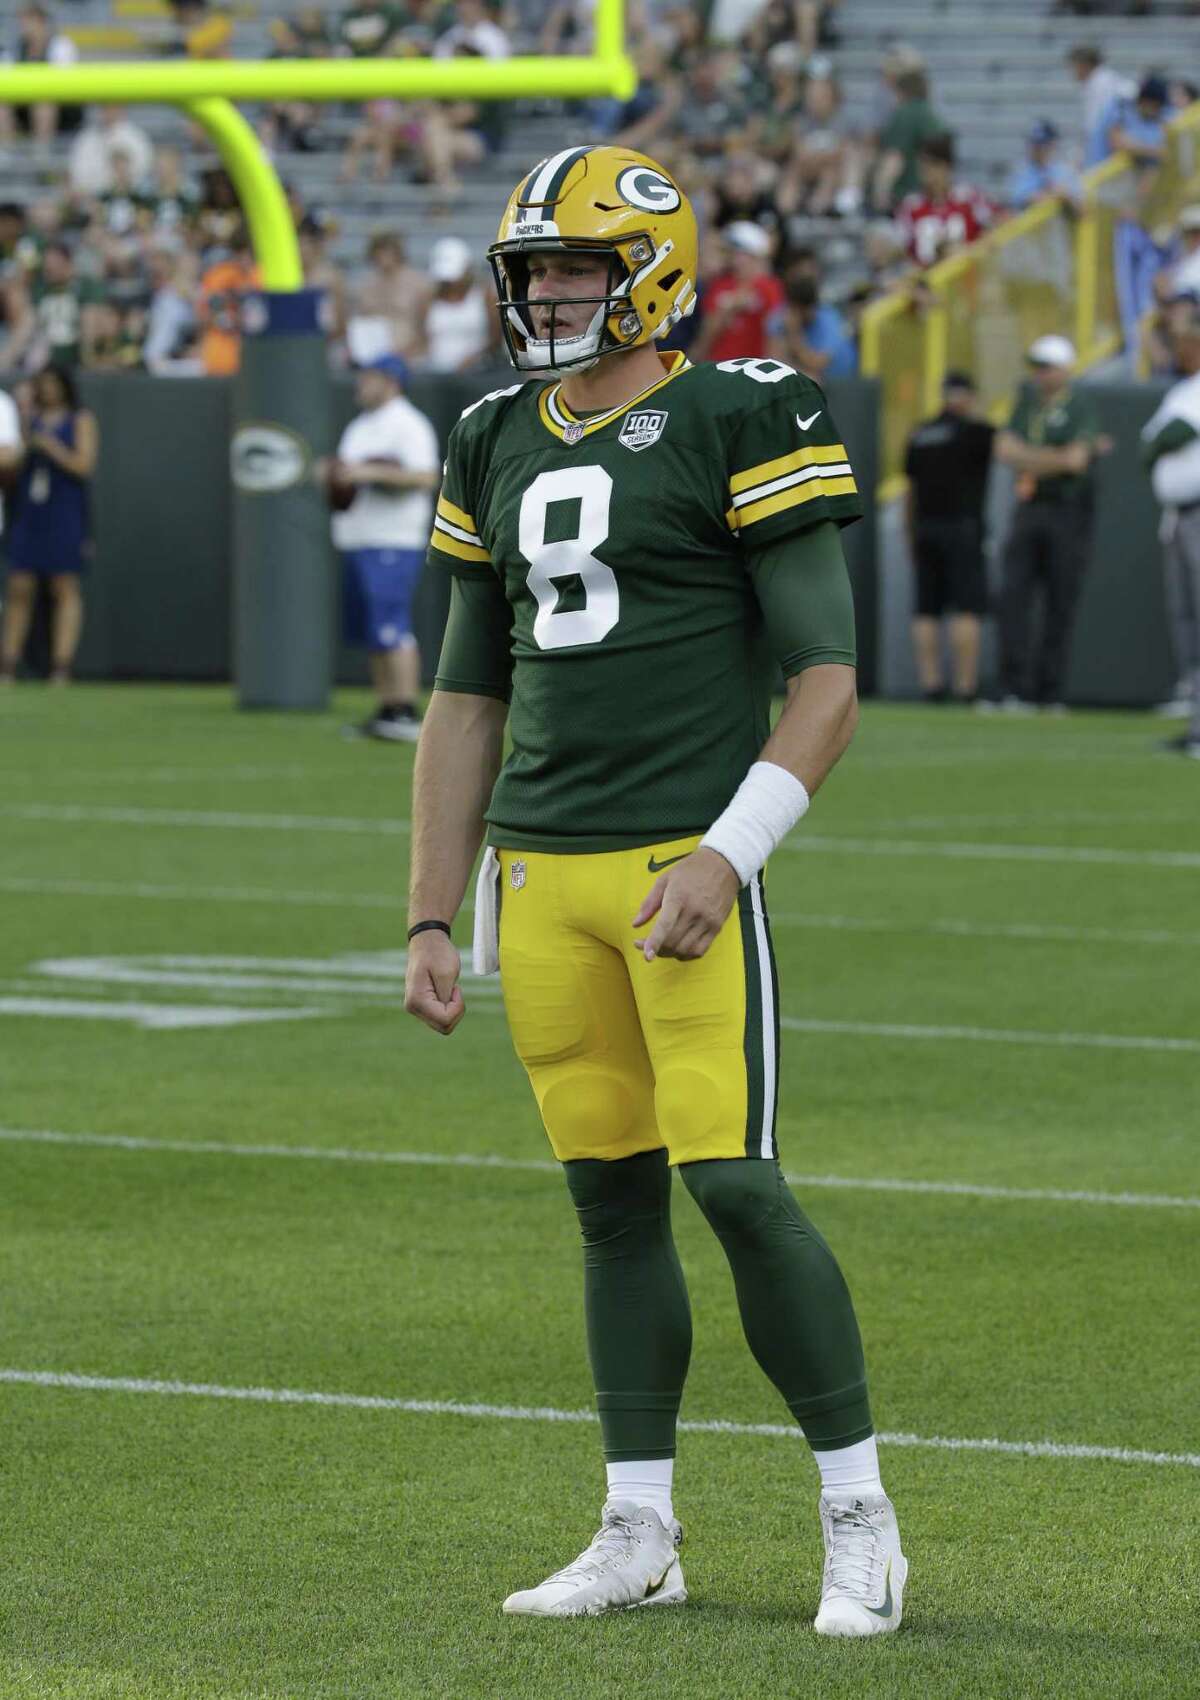 Middlefield’s Tim Boyle completed 7 of 15 throws for 130 yards and a pair of touchdowns in his first preseason action with the Green Bay Packers on Thursday night.